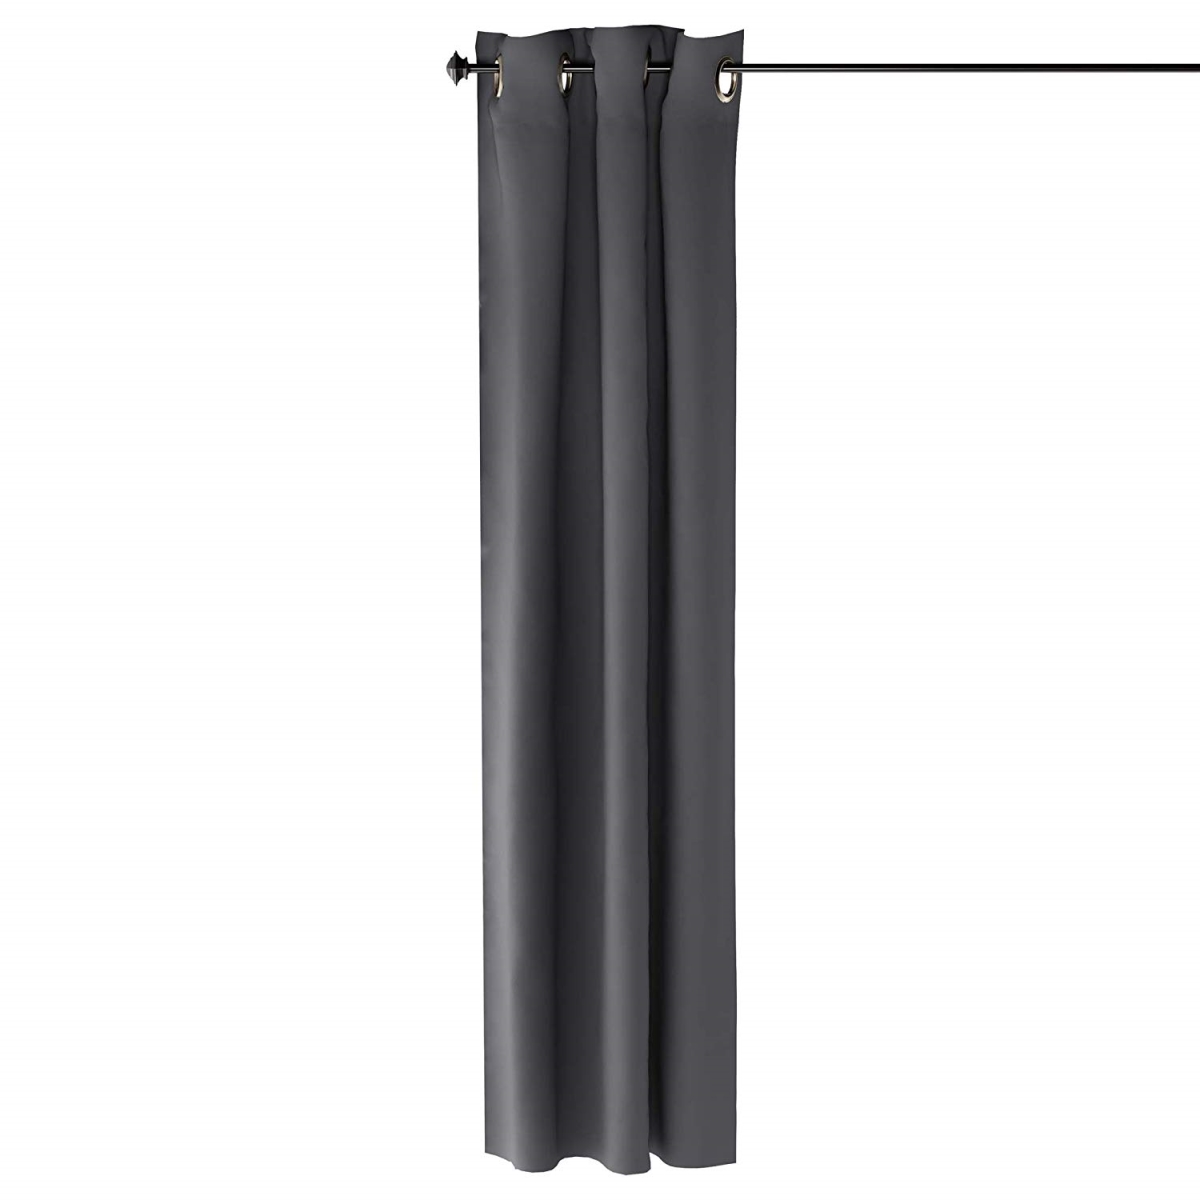 Fc66002dgy Collins Blackout Curtain, 42 X 84 In. - 1 Panel - Dark Grey